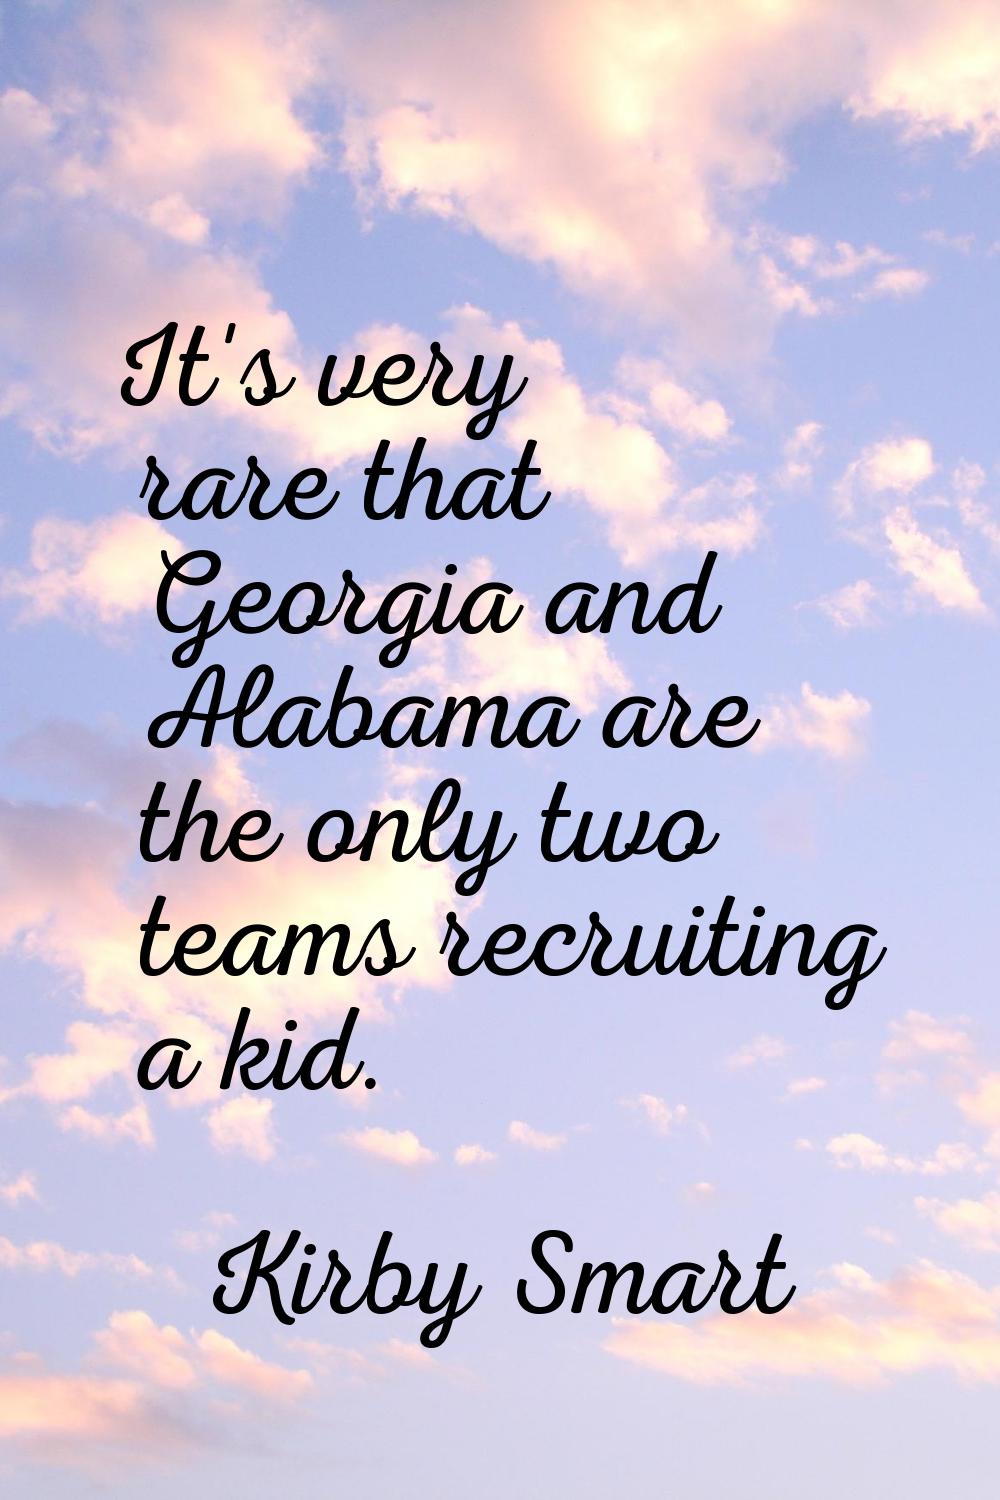 It's very rare that Georgia and Alabama are the only two teams recruiting a kid.